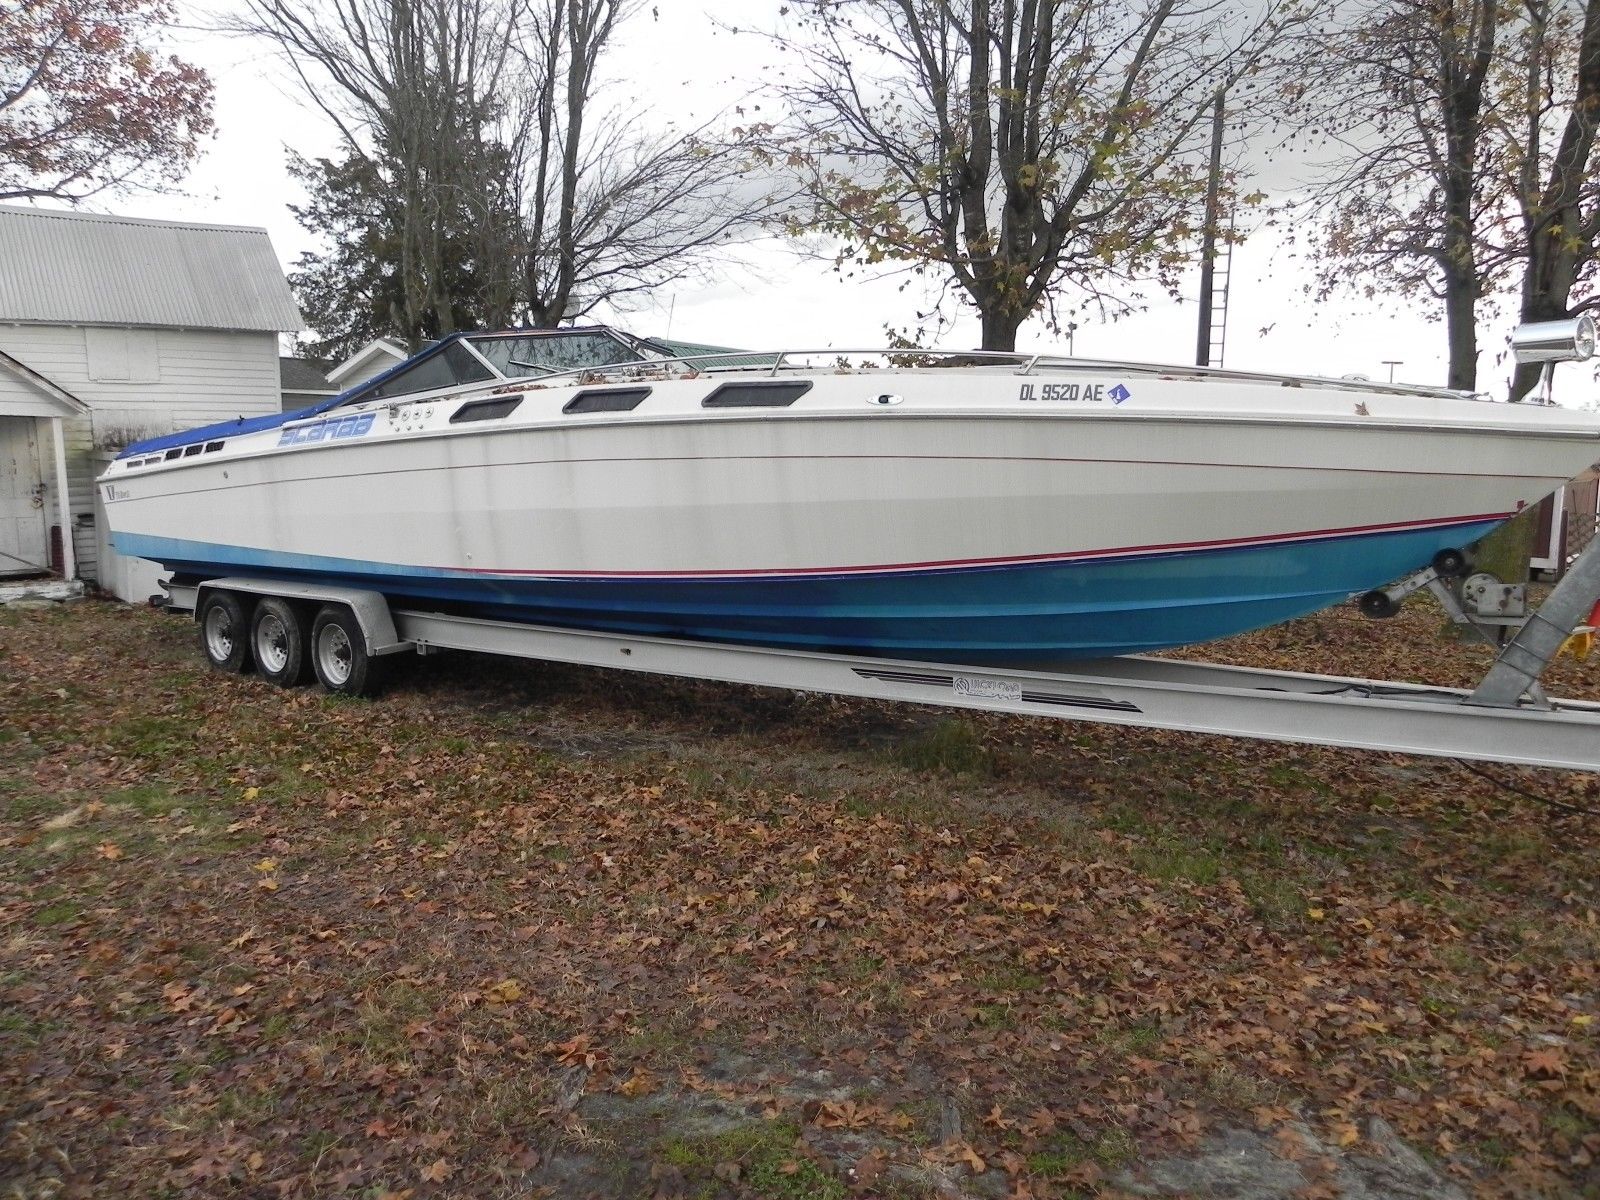 Wellcraft Scarab 38 1979 for sale for $22,000.